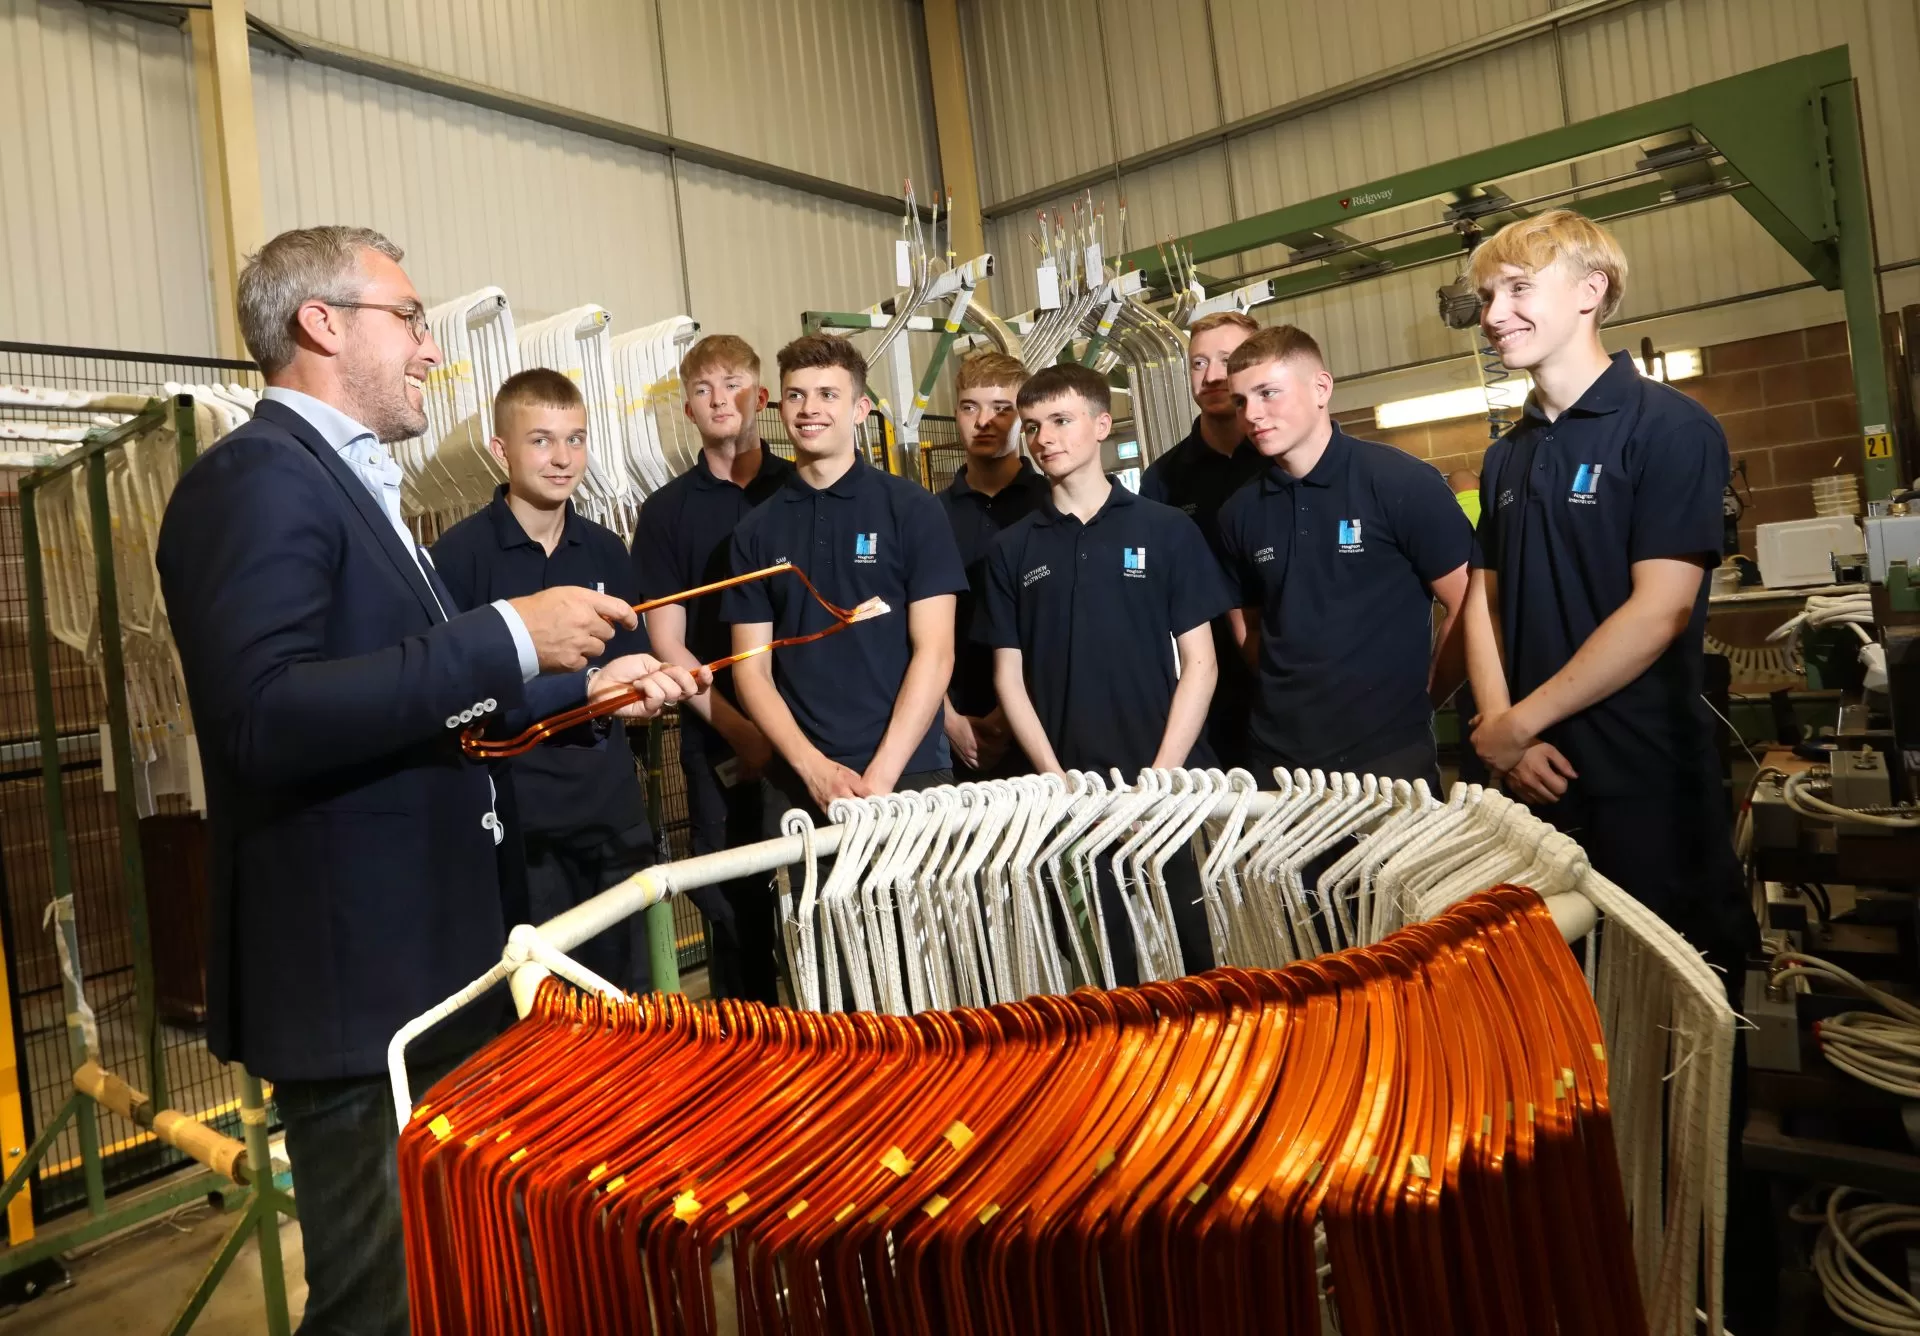 Houghton International's new apprentices gather with CEO Michael Mitten